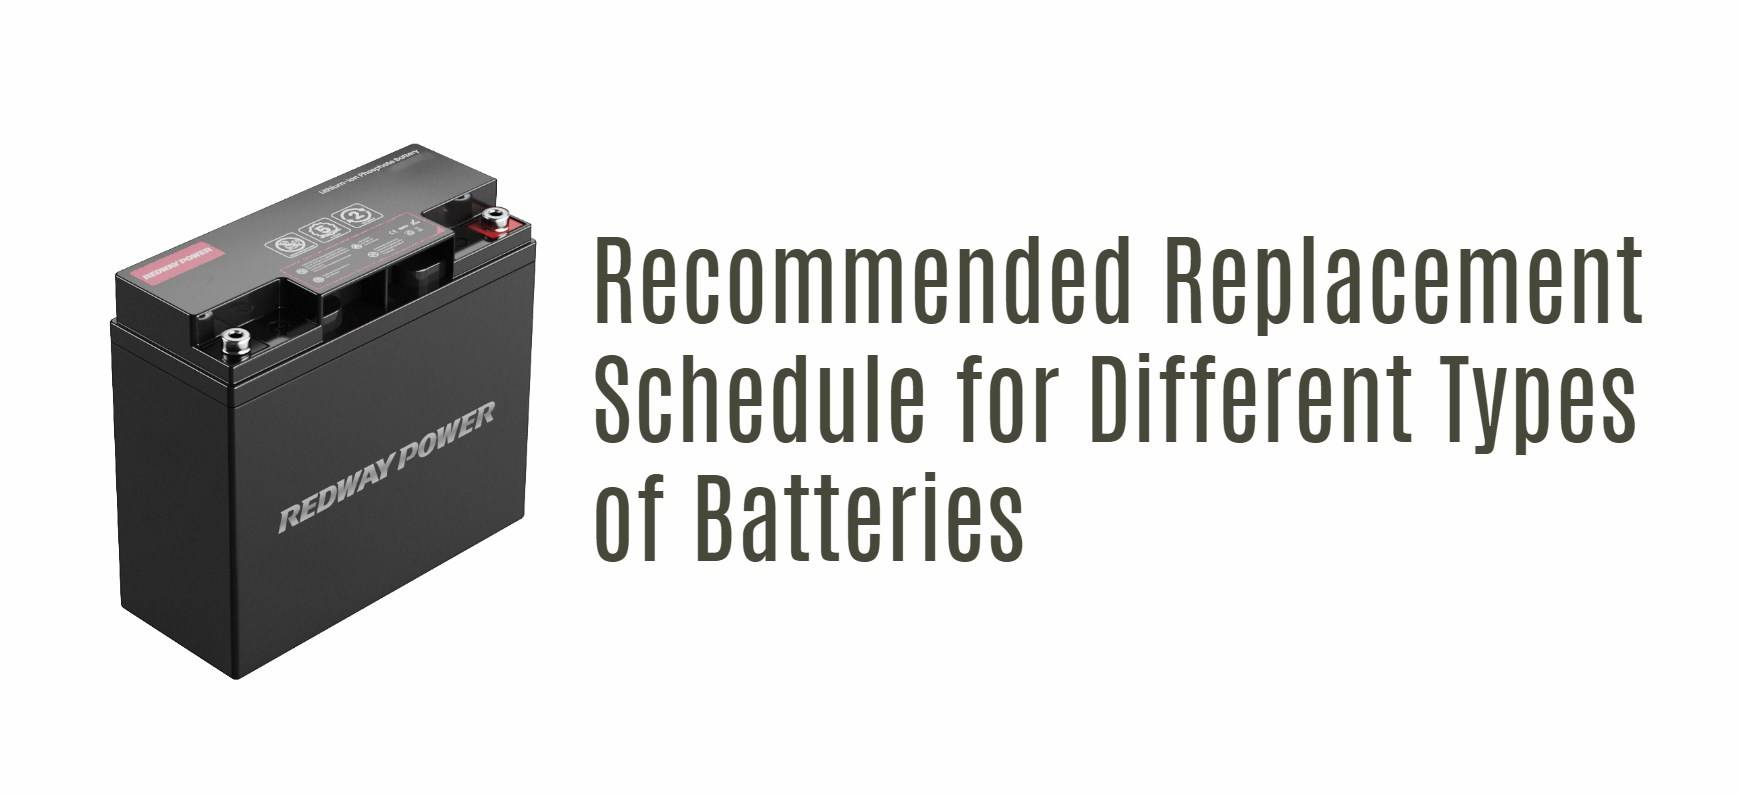 emergency light batteries: Recommended Replacement Schedule for Different Types of Batteries. 12v 18ah lithium battery factory manufacturer lifepo4 lfp